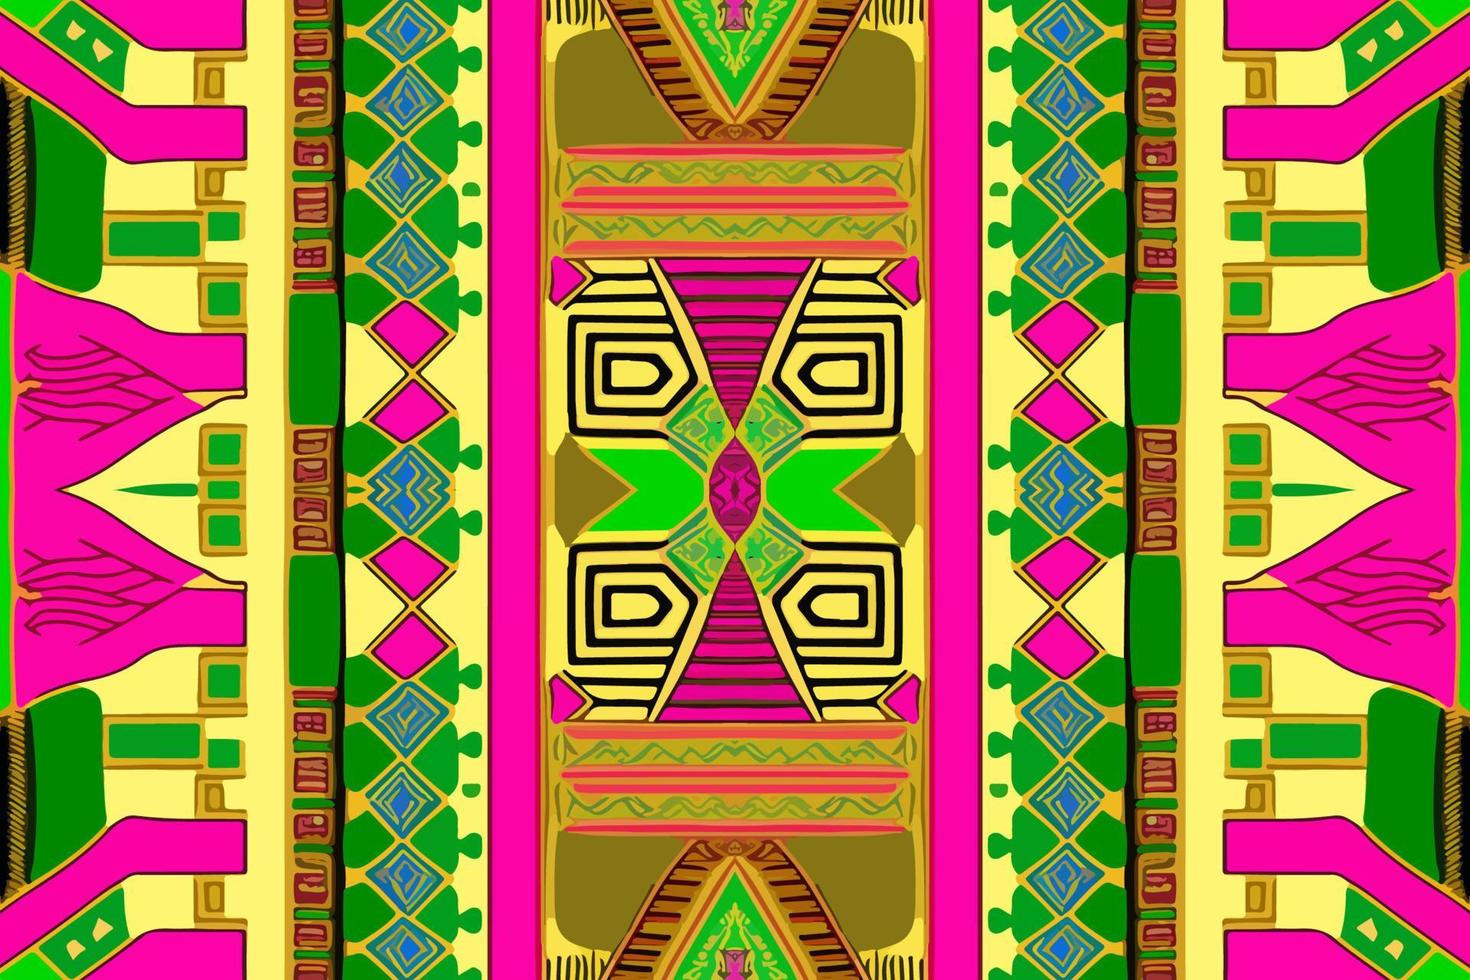 Egyptian pattern green pink and yellow background. Abstract traditional folk antique tribal ethnic graphic line. Ornate elegant luxury vintage retro style. Texture textile fabric ethnic egypt patterns vector